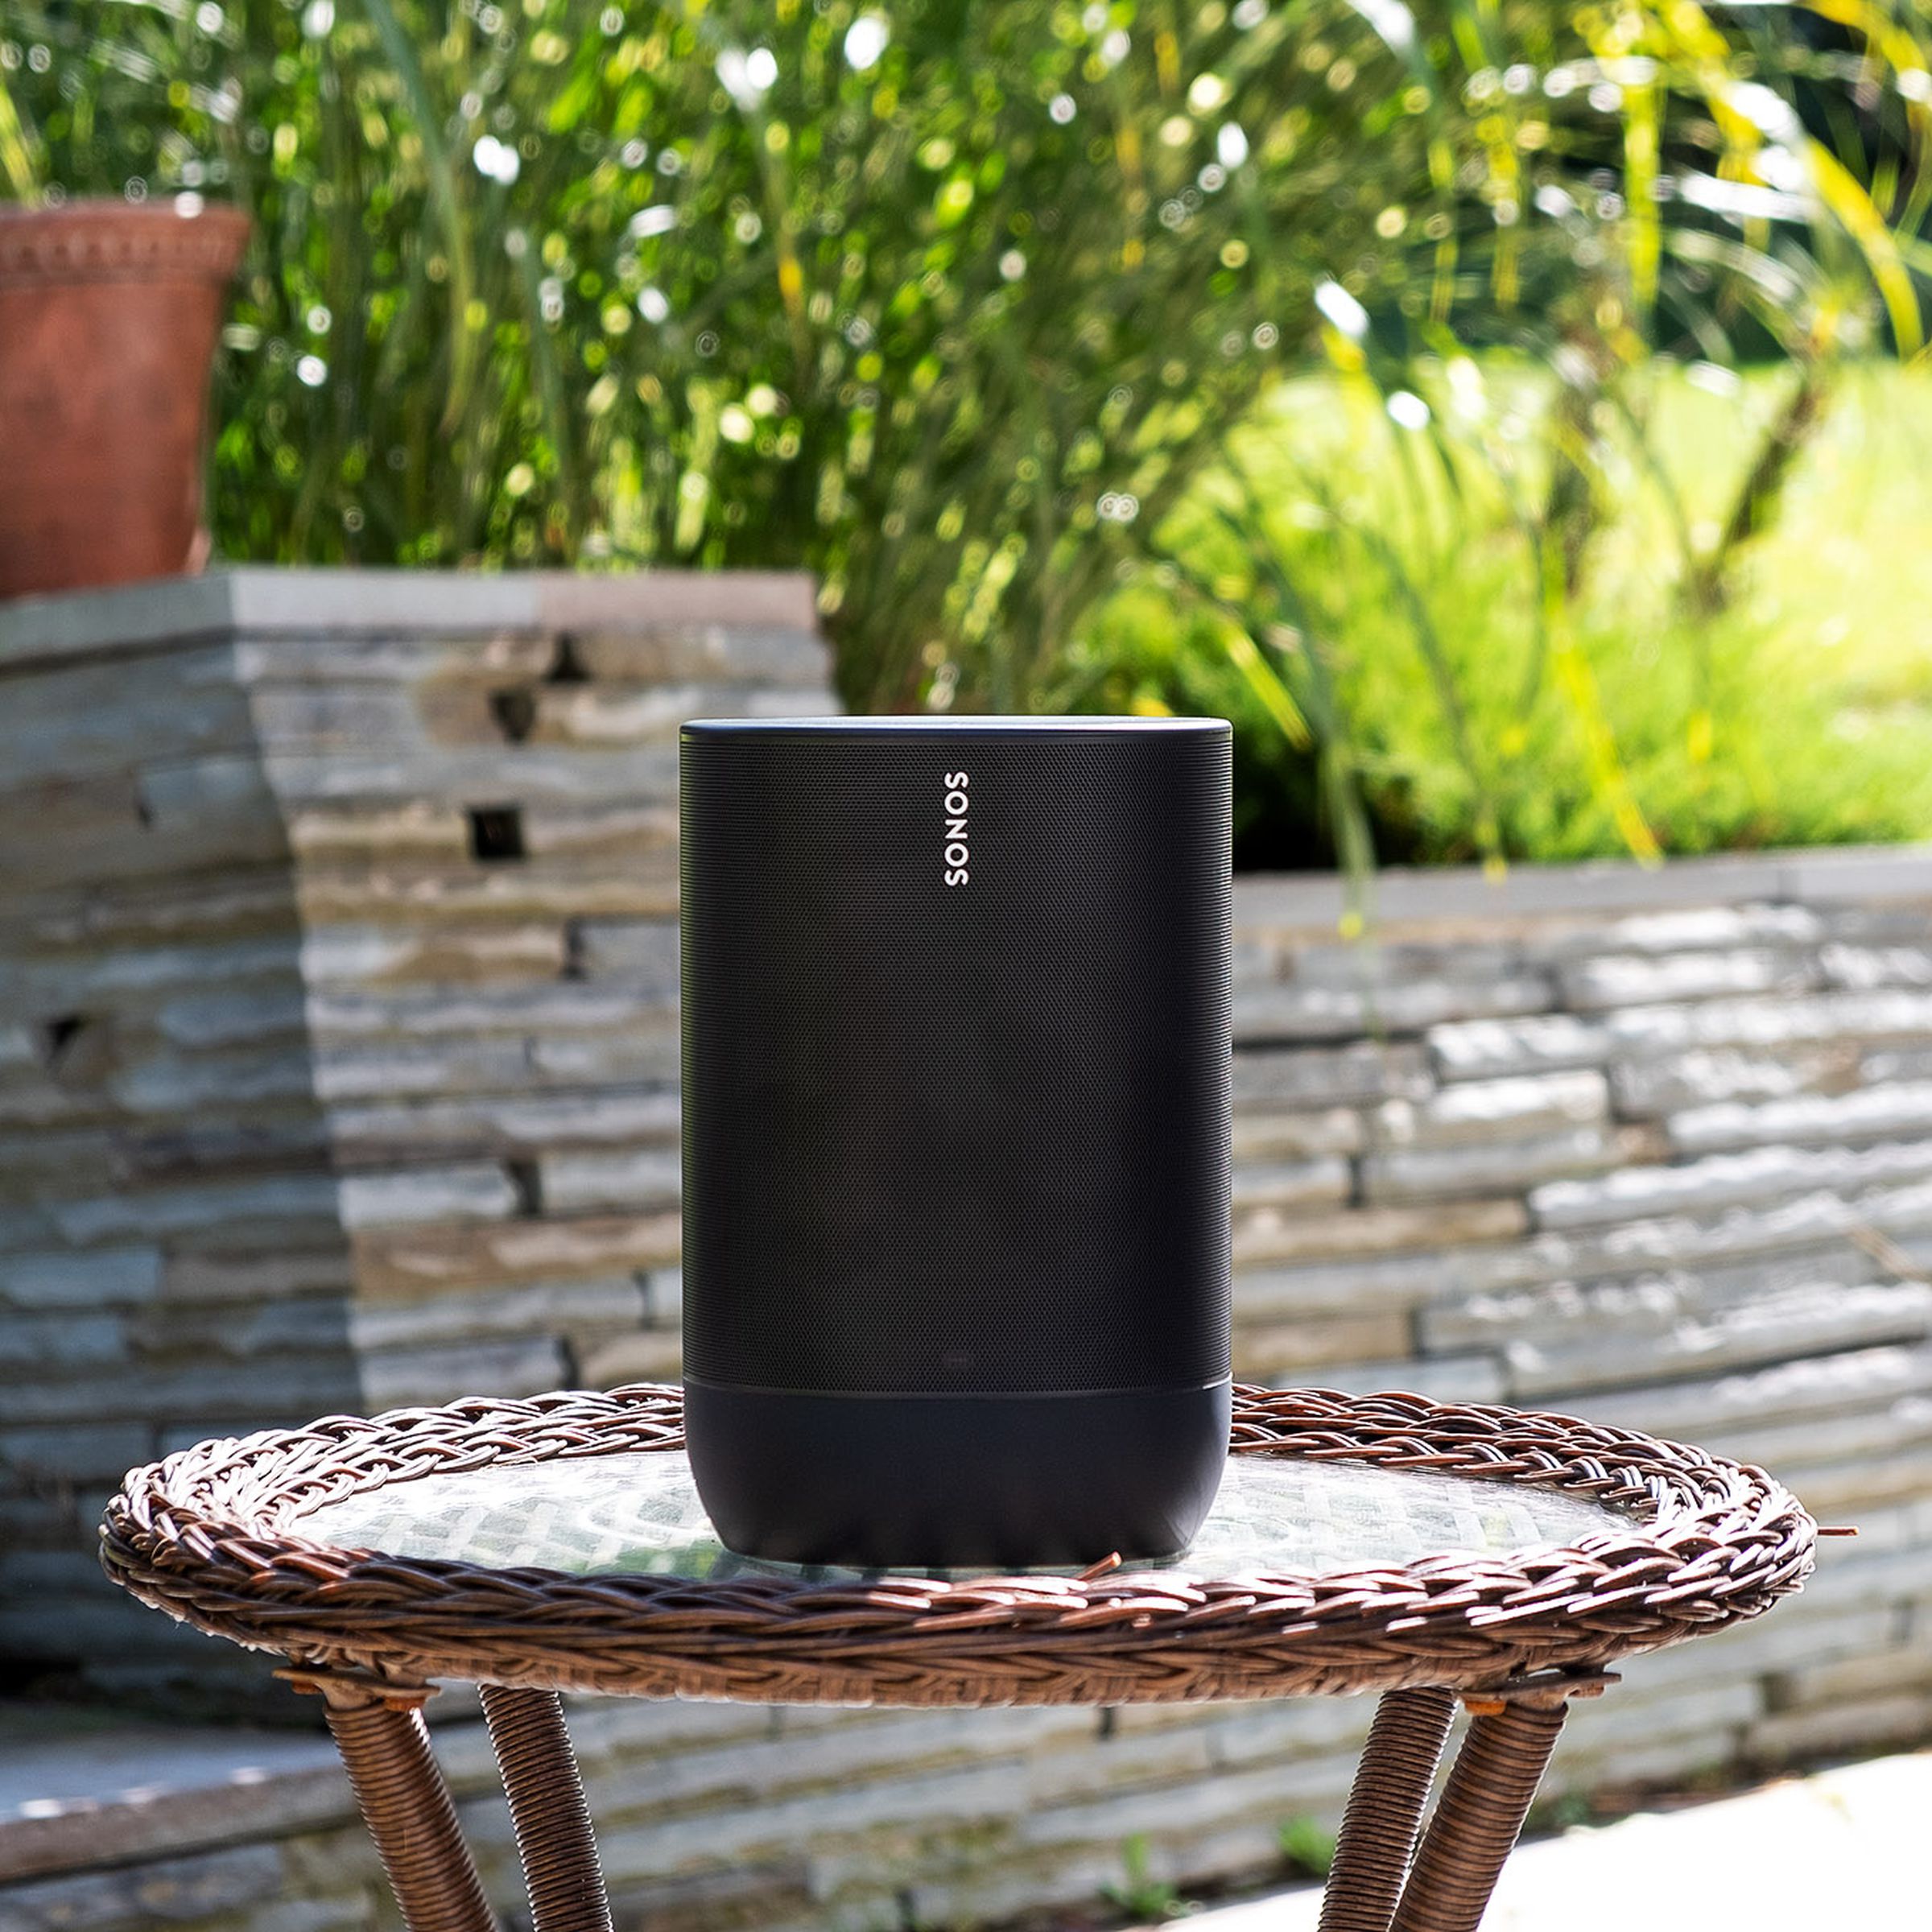 A photo of the Sonos Move speaker on a backyard patio.